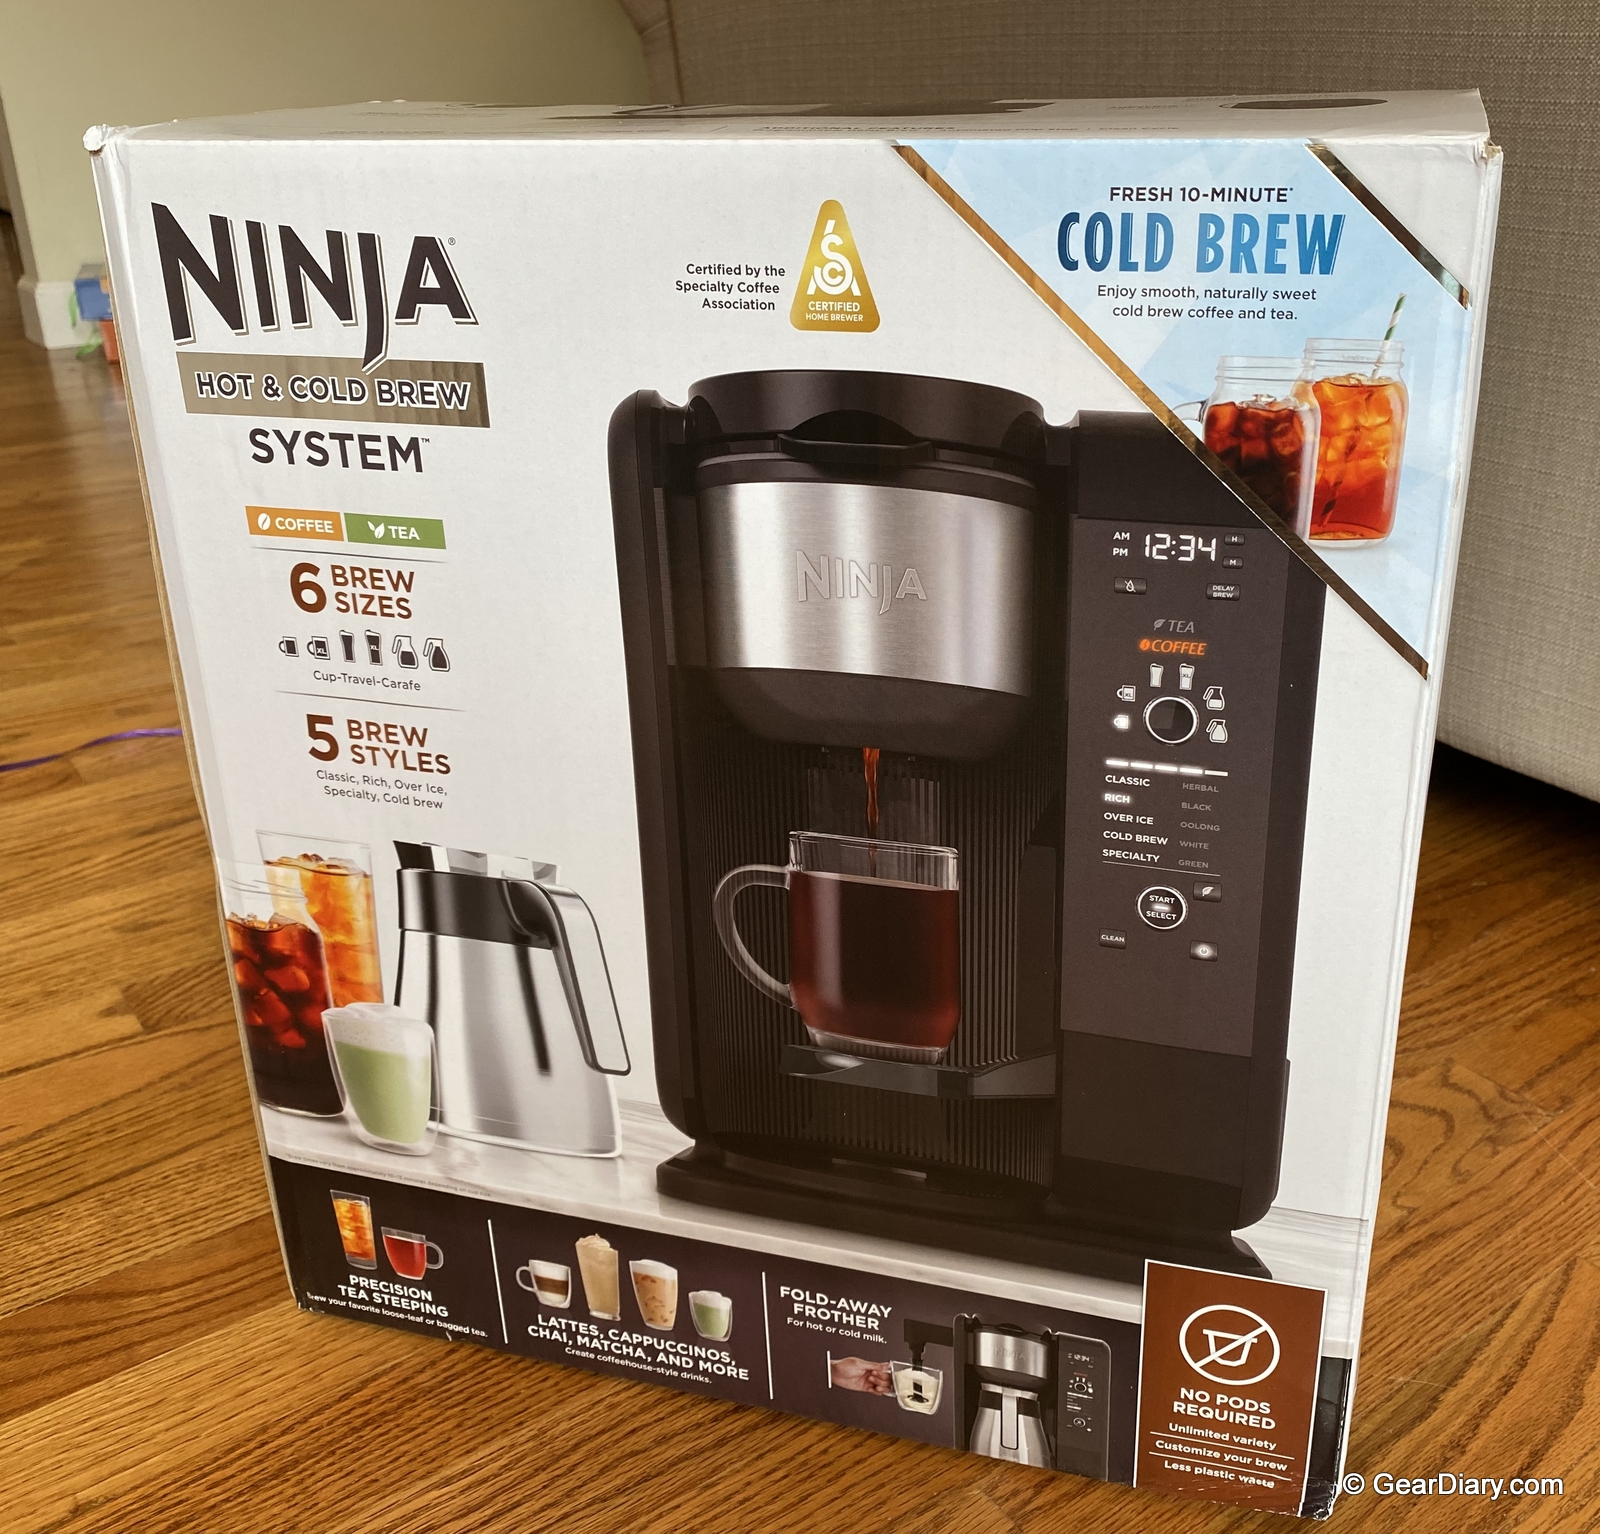 Making 15 Minute Cold Brew Coffee in the Ninja Cold and Hot Brewed